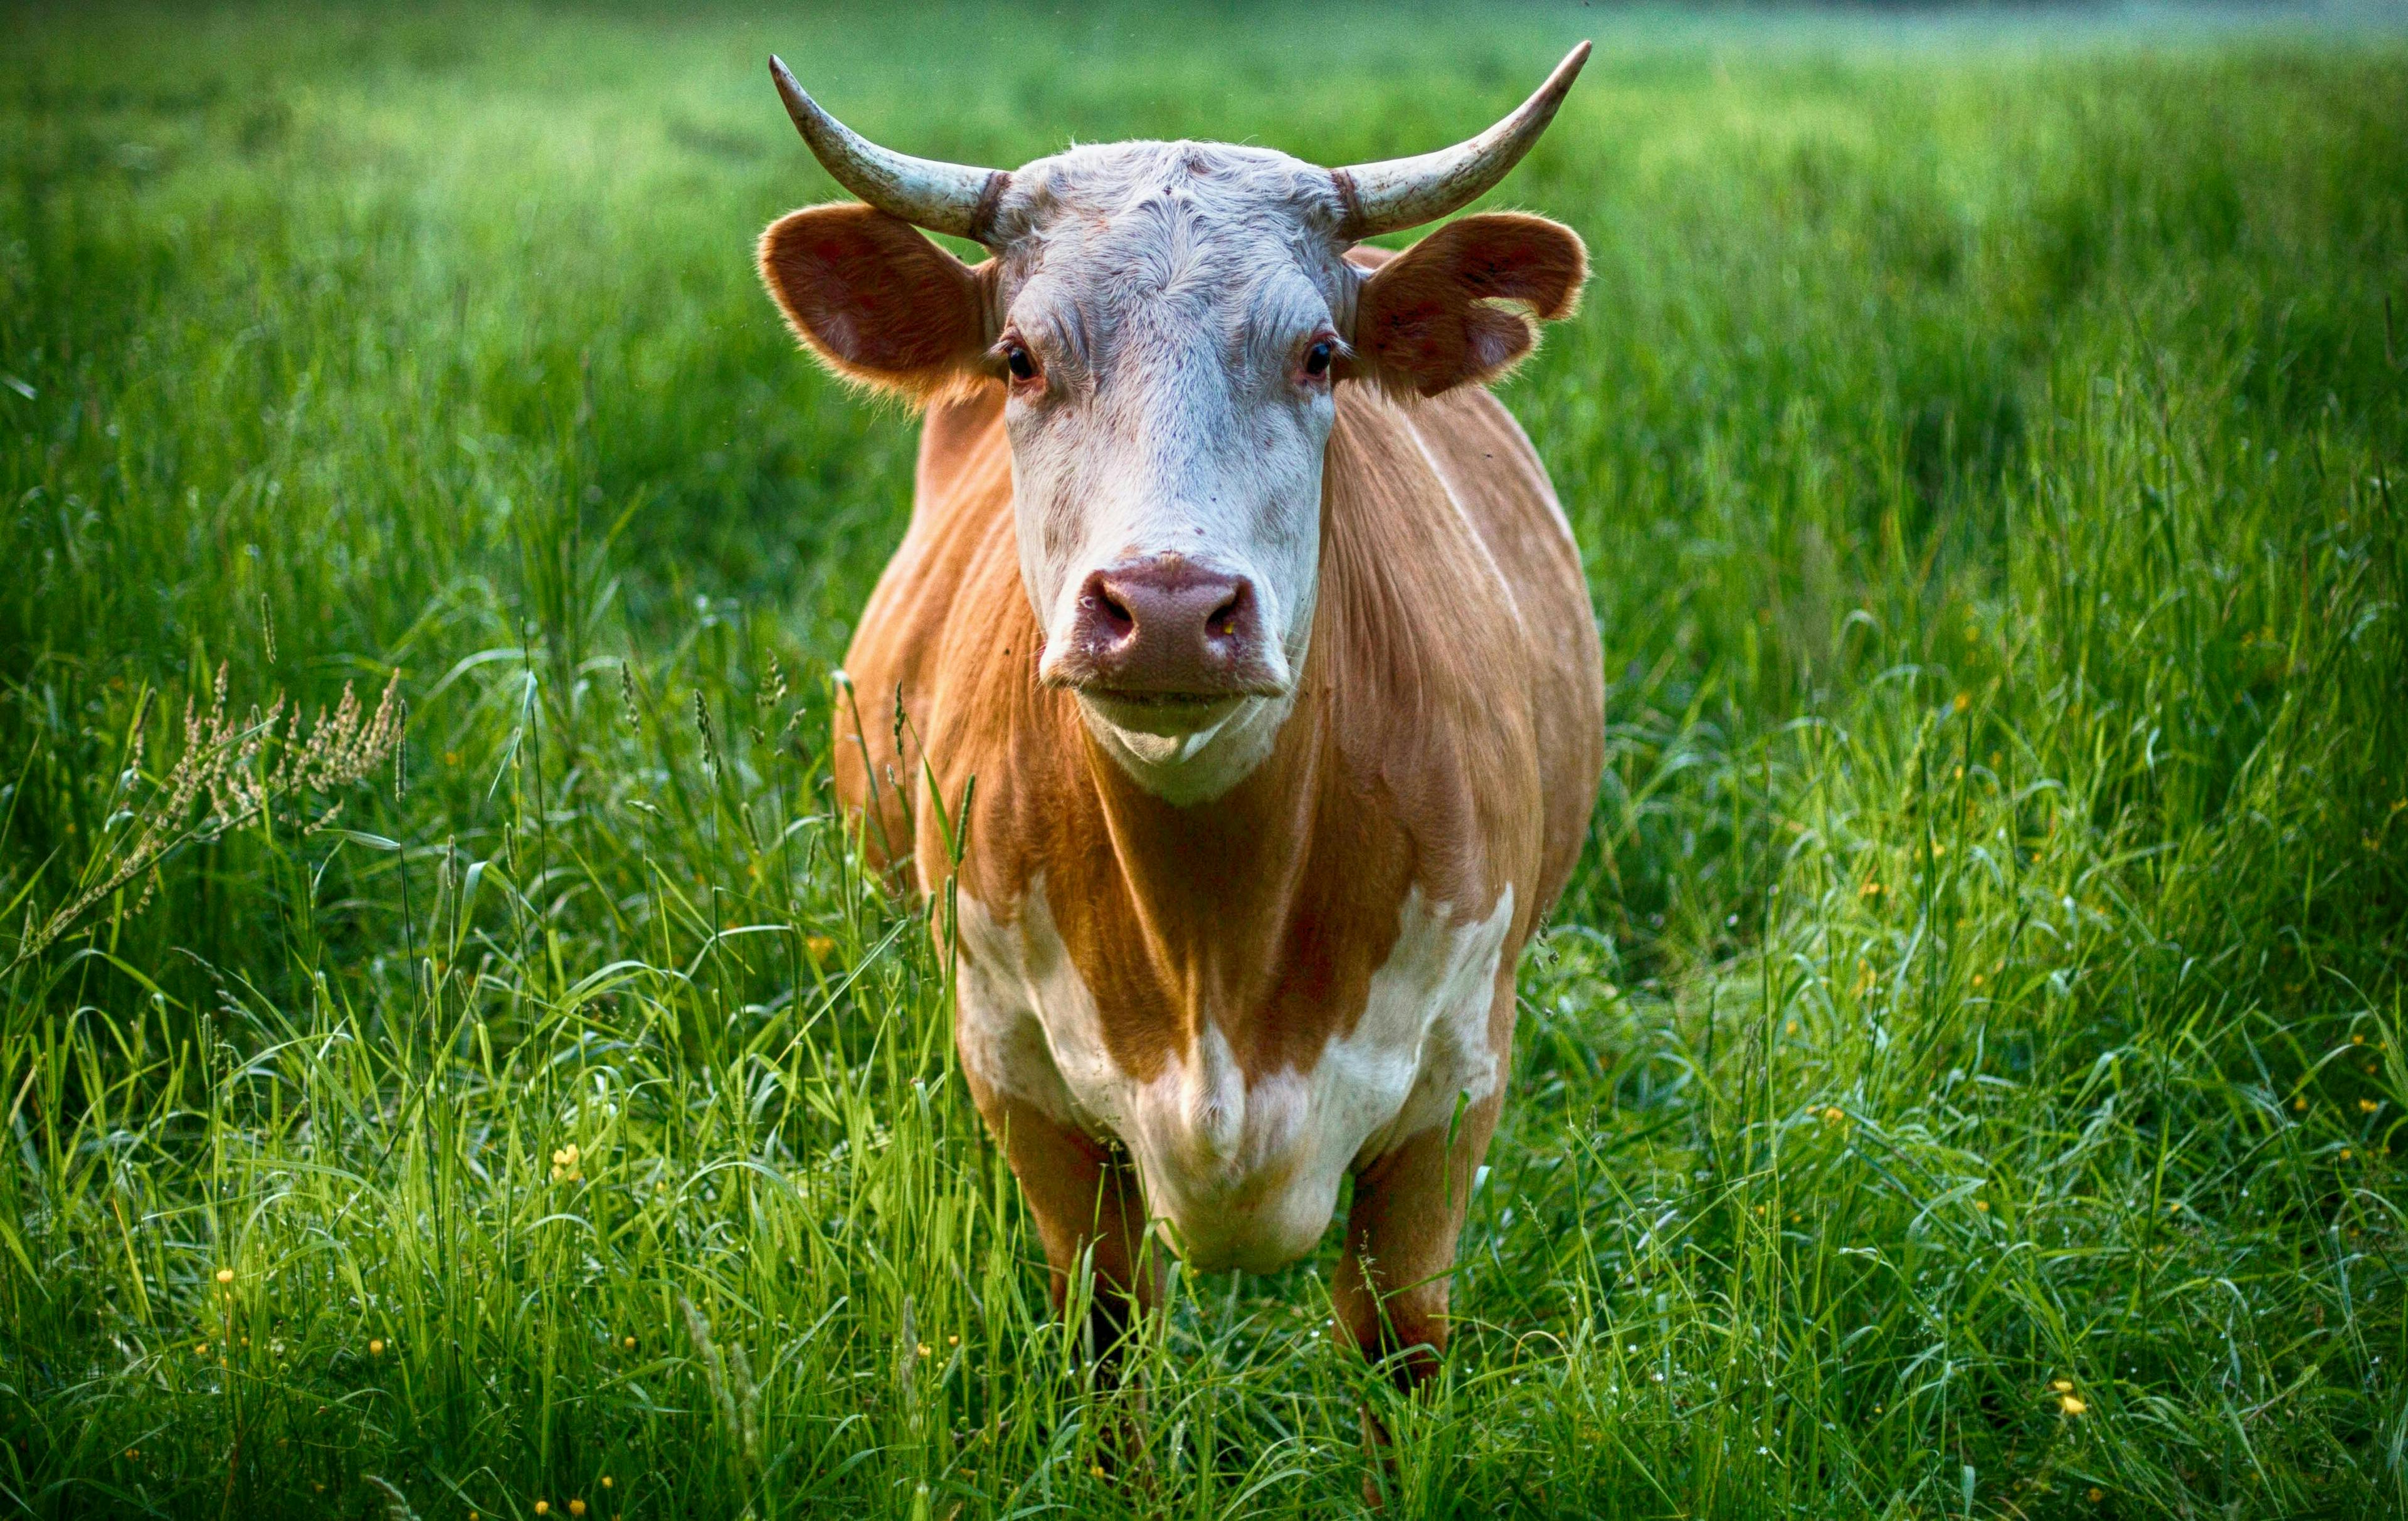 a cow; Image Credit: Pexels, Pixaby